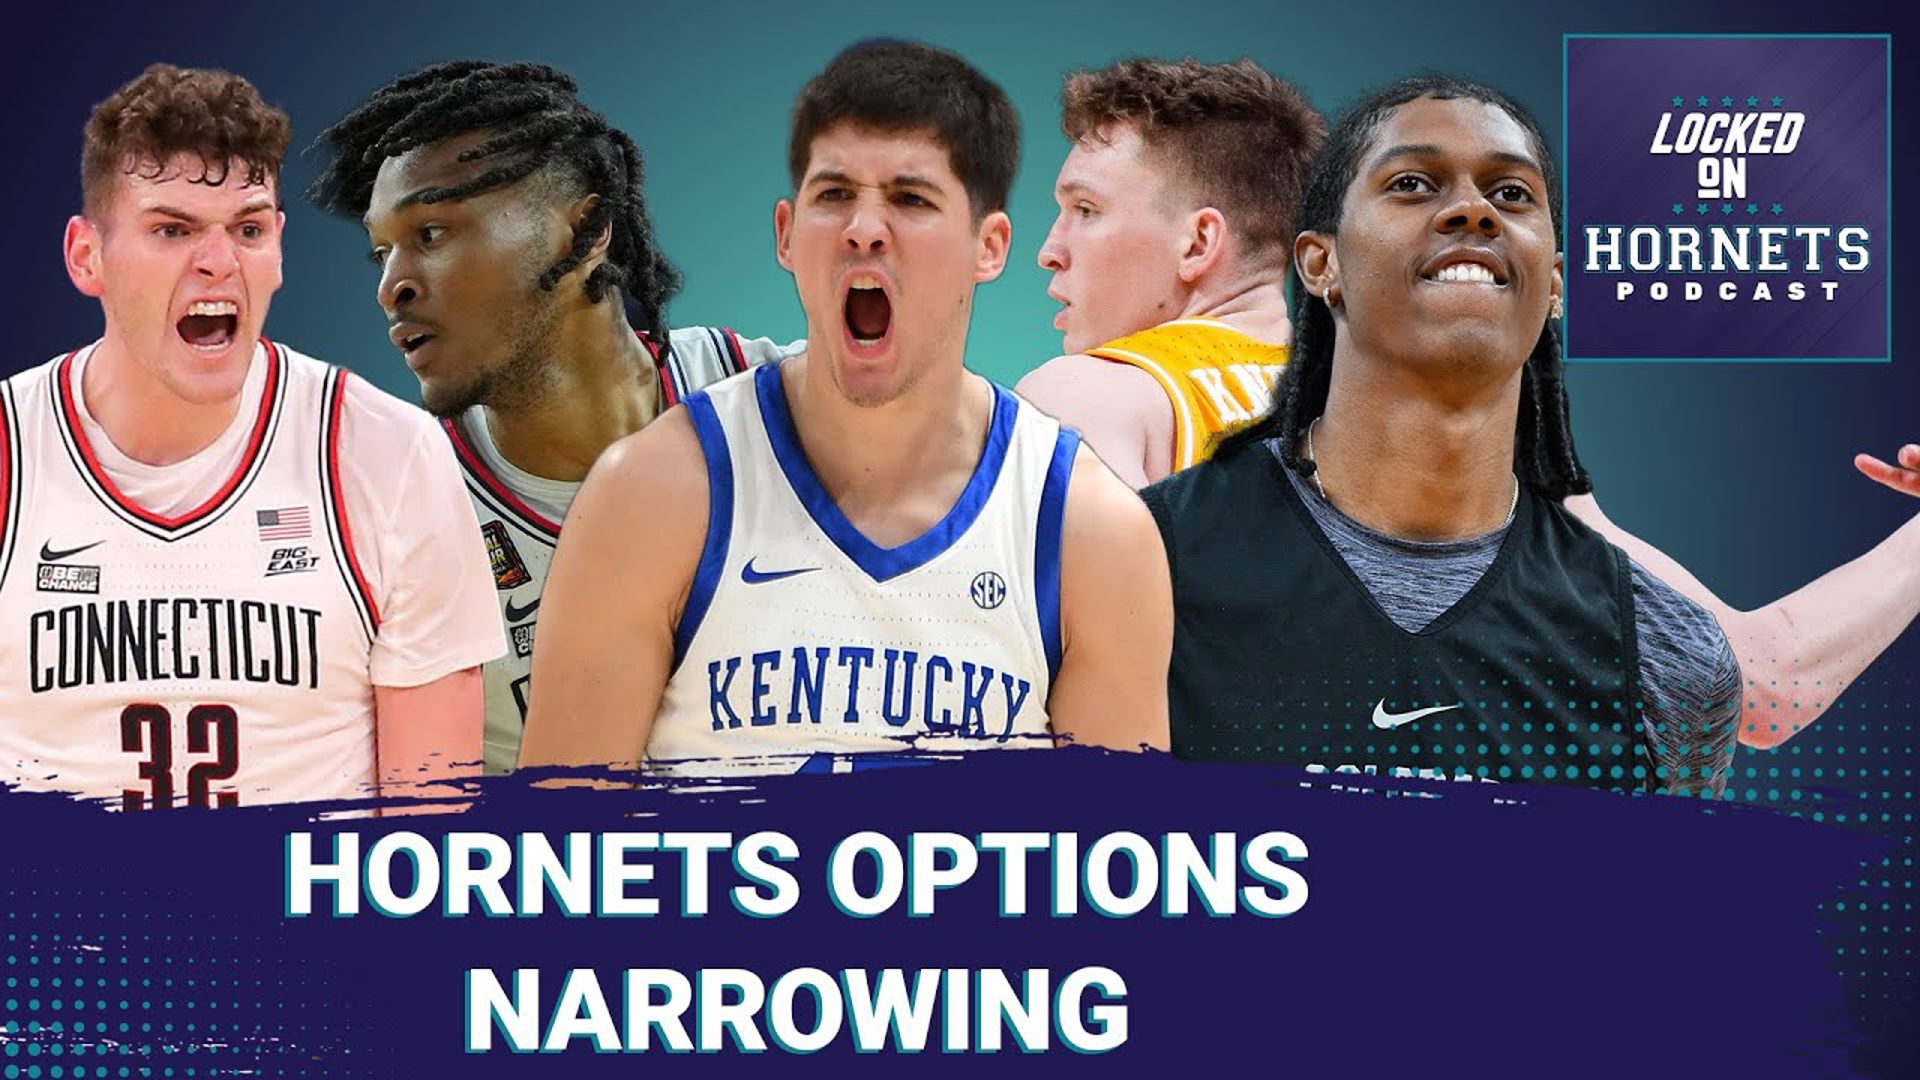 Hornets draft options down to 3 players + with the 6th pick in the Locked On Mock Draft we select..